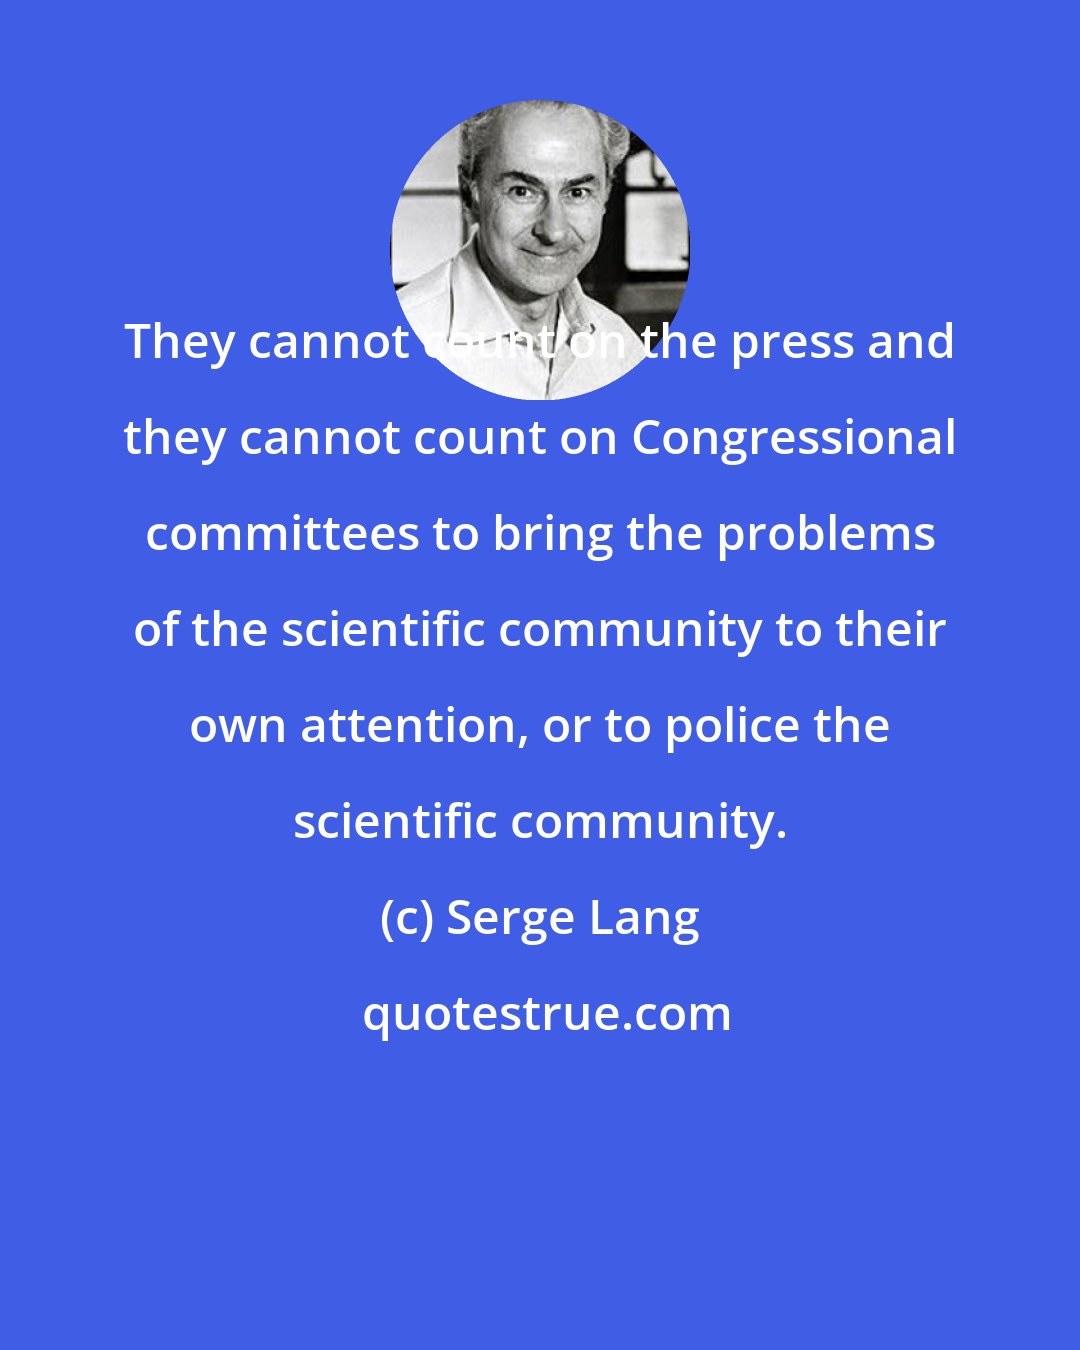 Serge Lang: They cannot count on the press and they cannot count on Congressional committees to bring the problems of the scientific community to their own attention, or to police the scientific community.